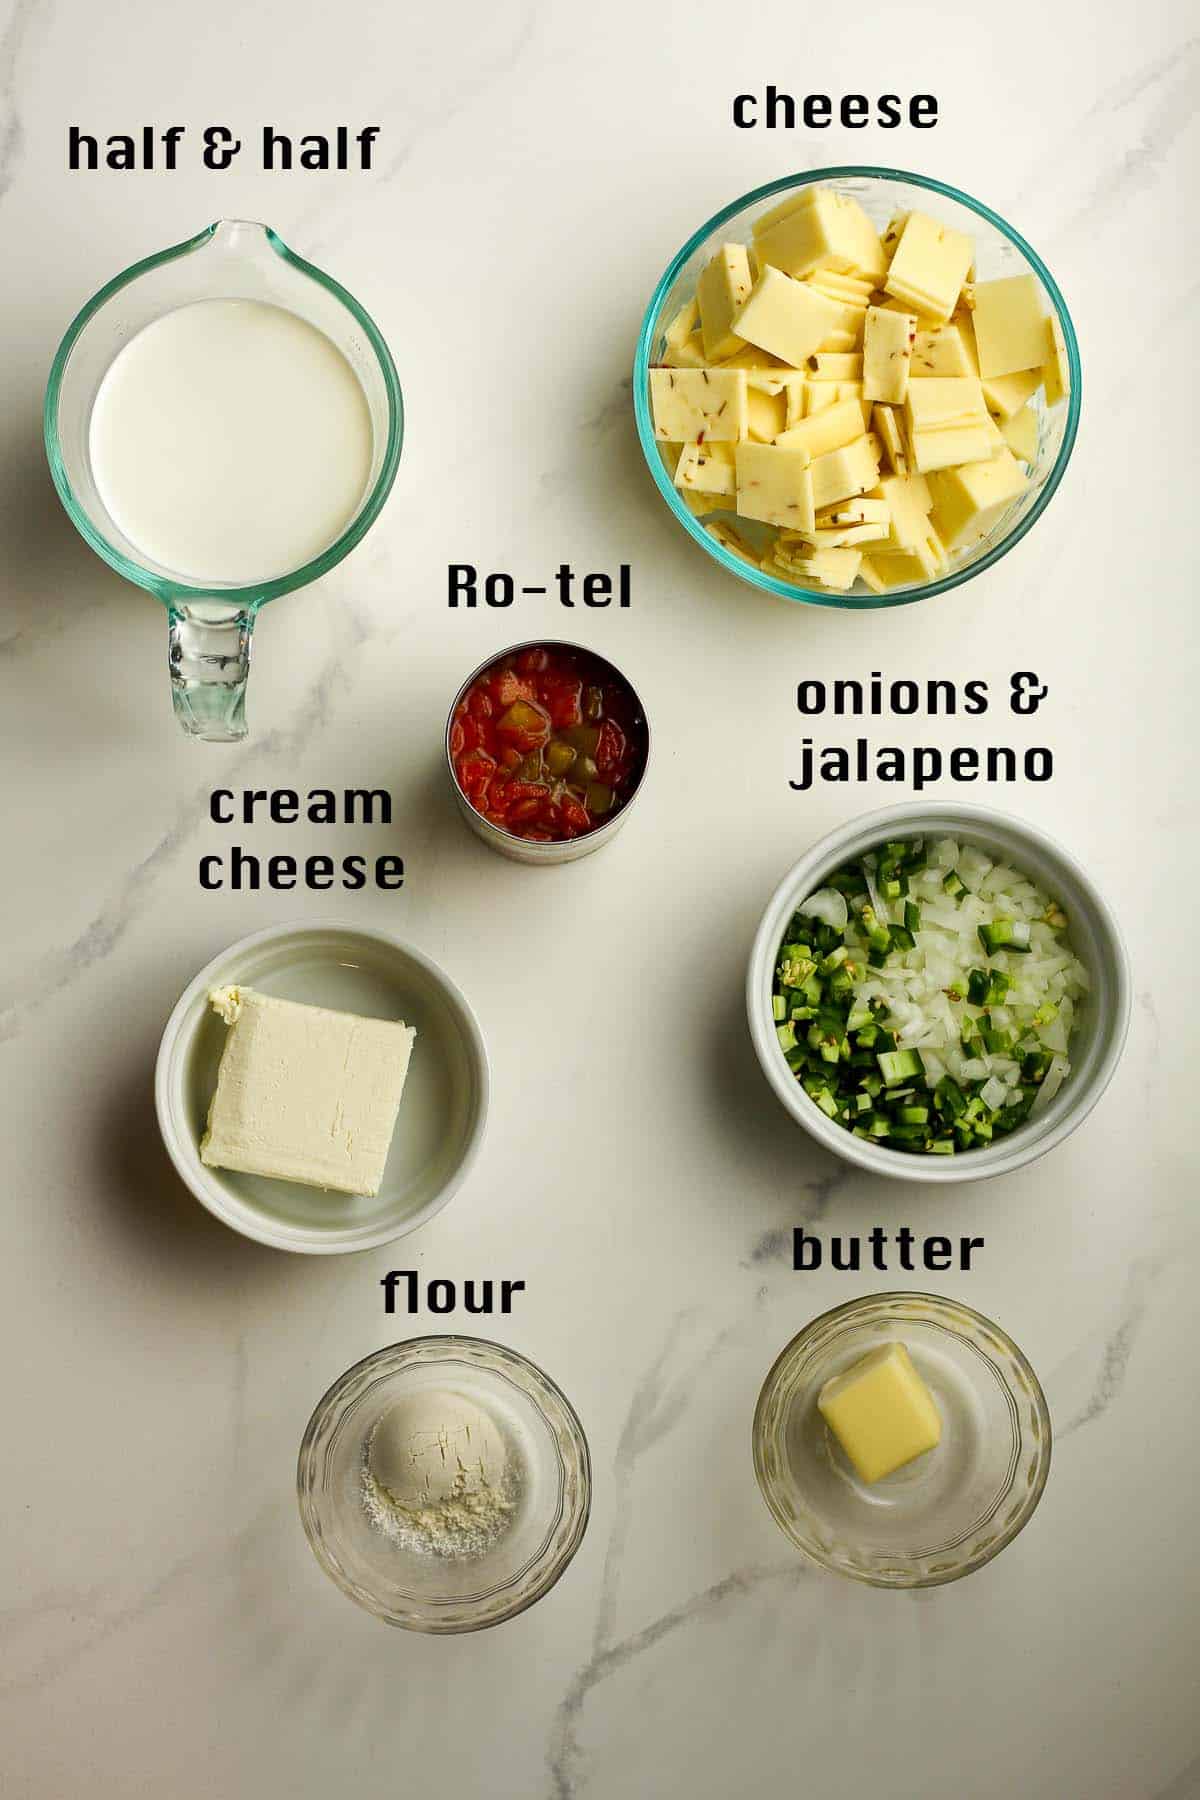 All of the ingredients in bowls on a white background.